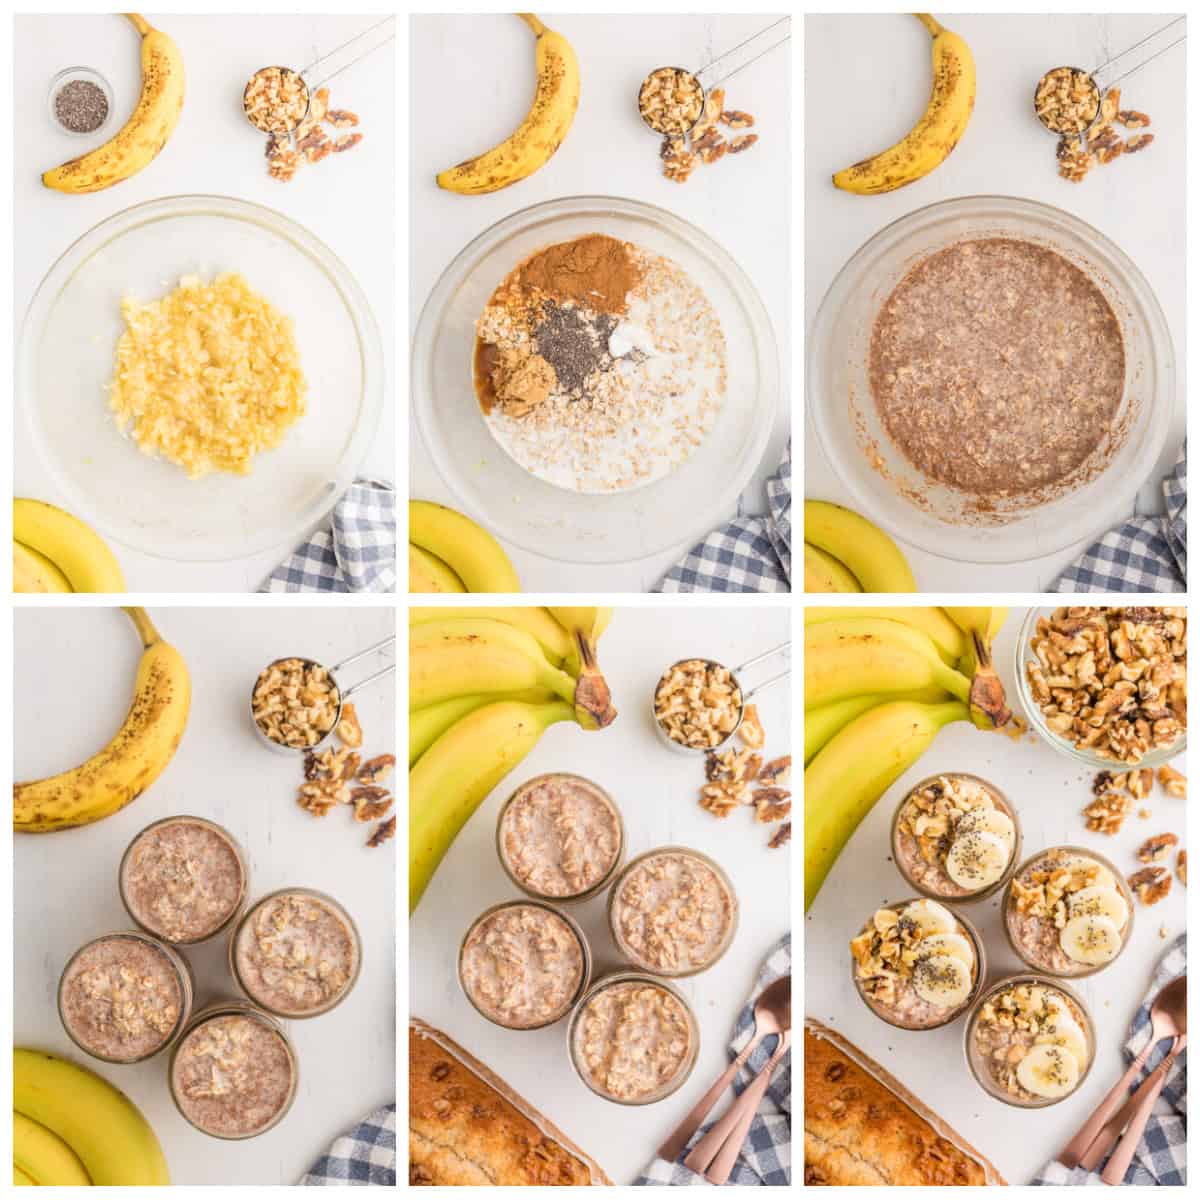 Step by step photos on how to make Banana Overnight Oats.